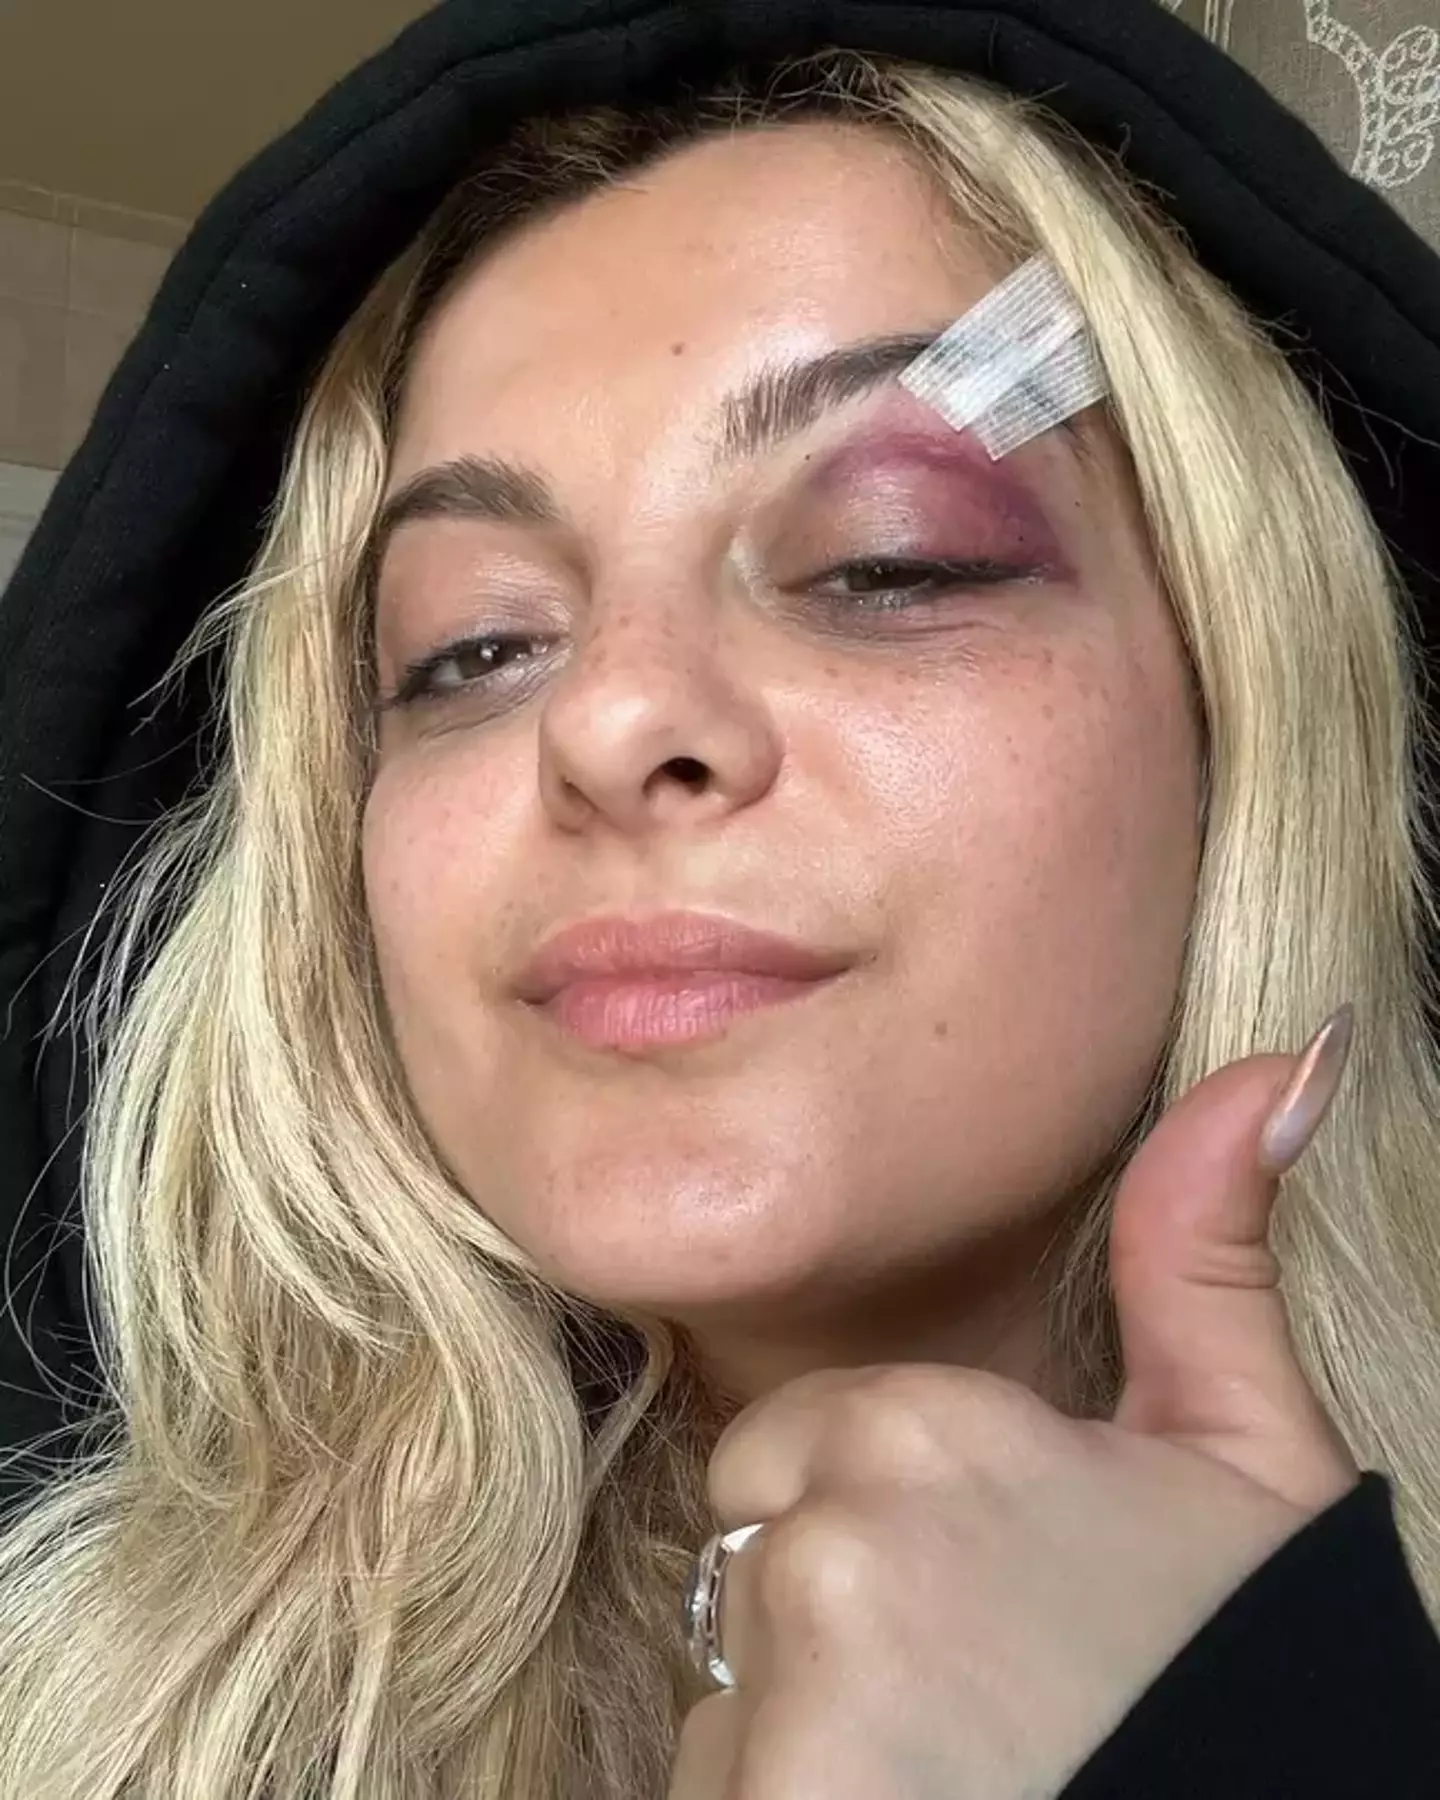 Rexha shared two pictures of her injuries.